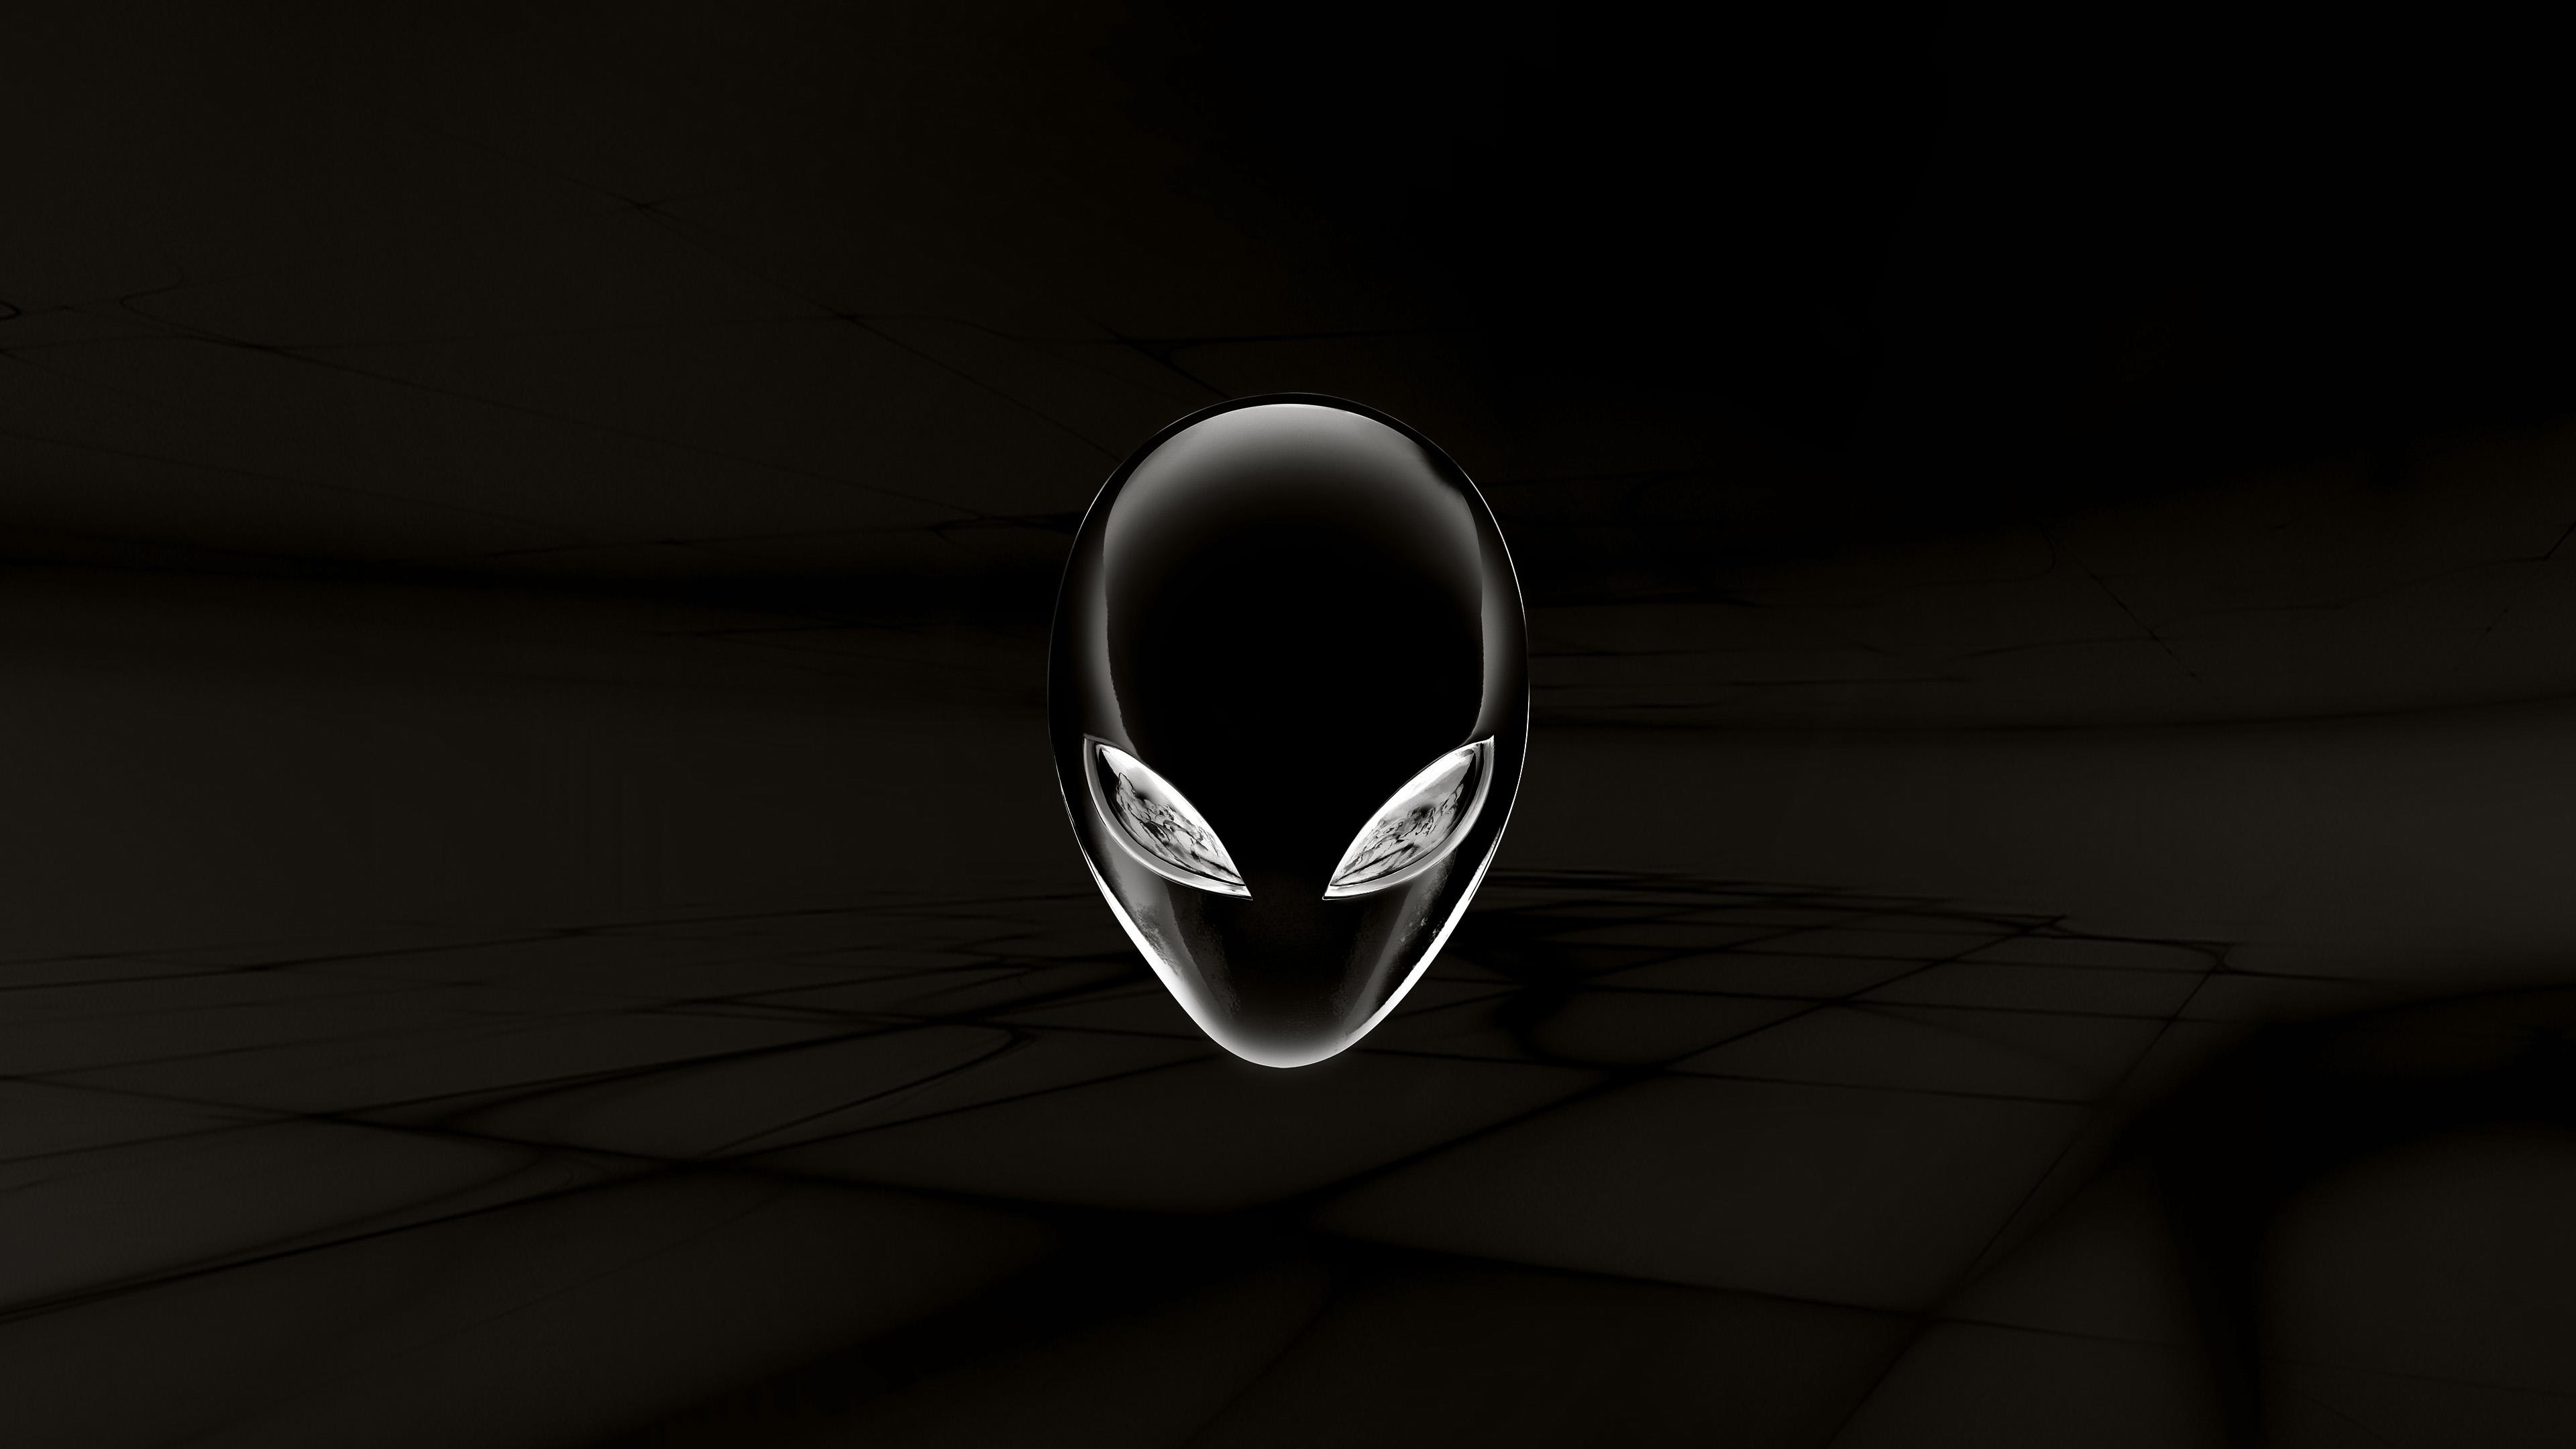 I made an inverted Alienware desktop background so I could keep the same style but also find the mouse cursor (4k 16x9)